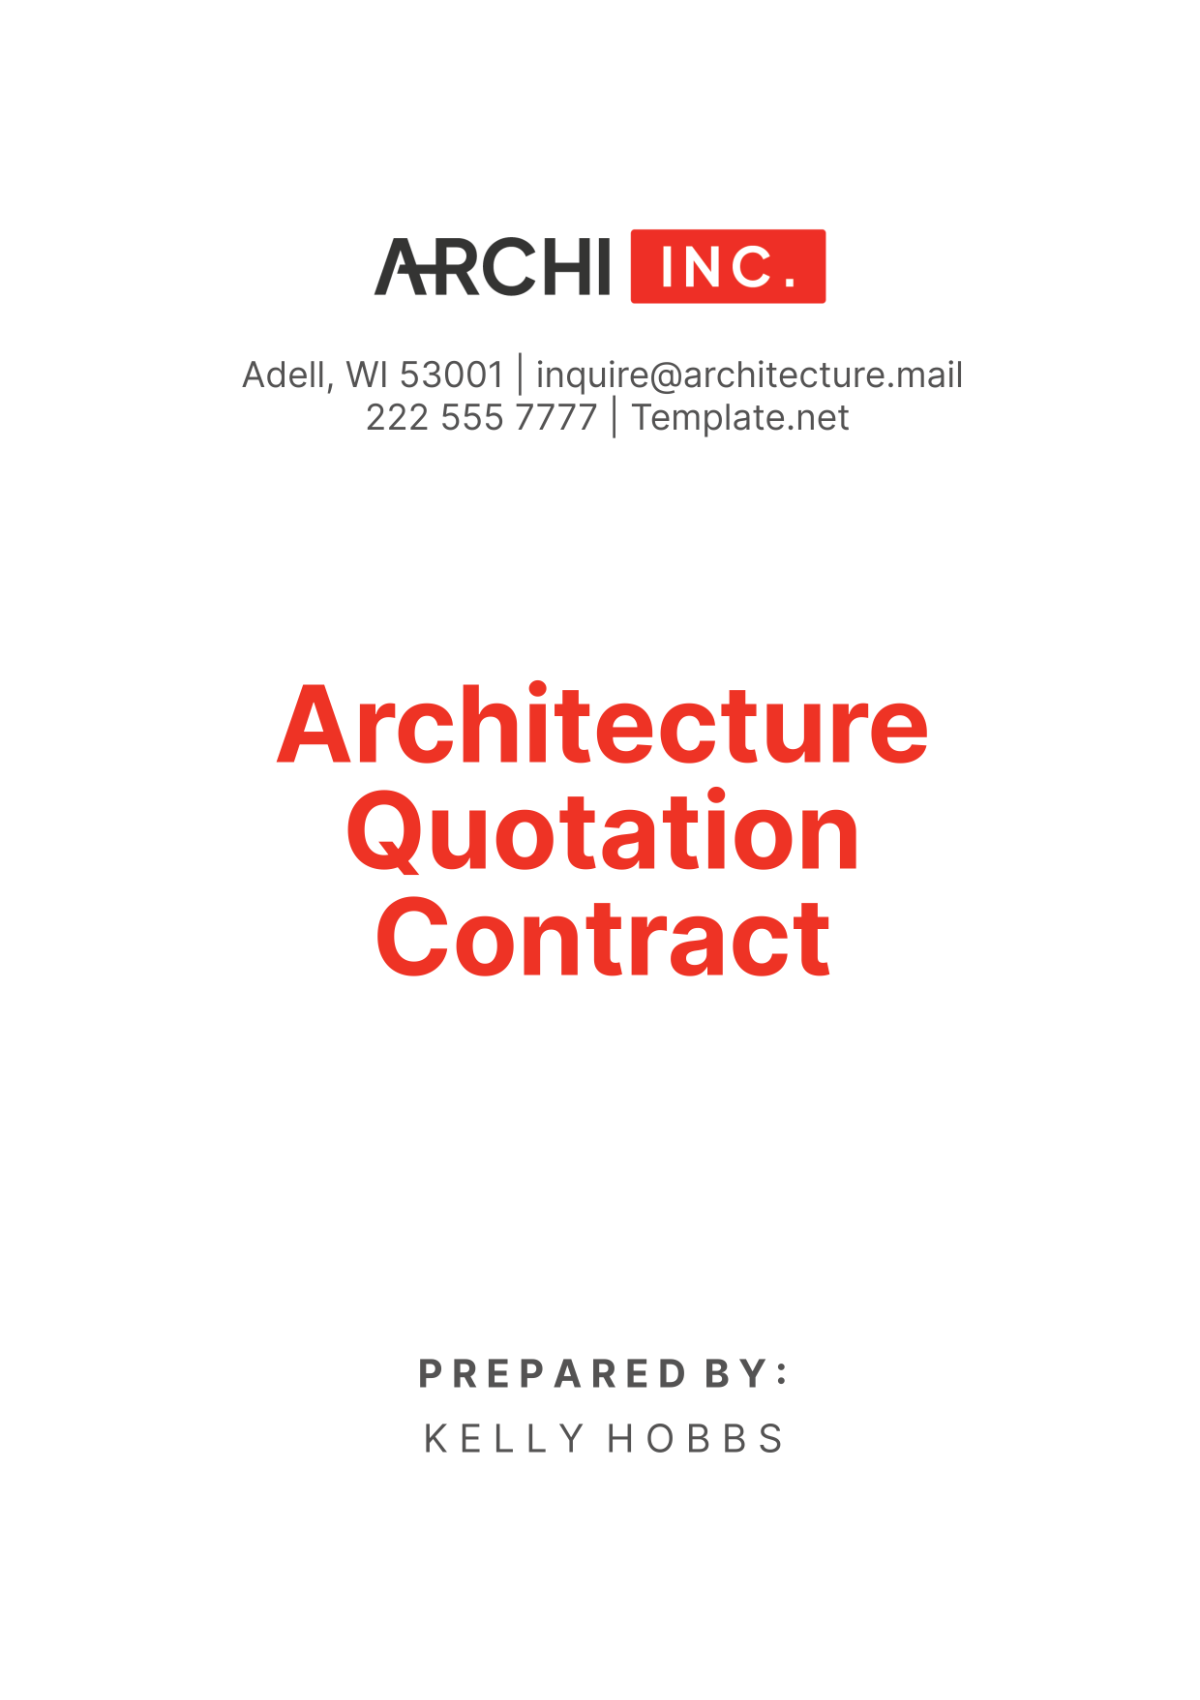 Free Architecture Quotation Contract Template